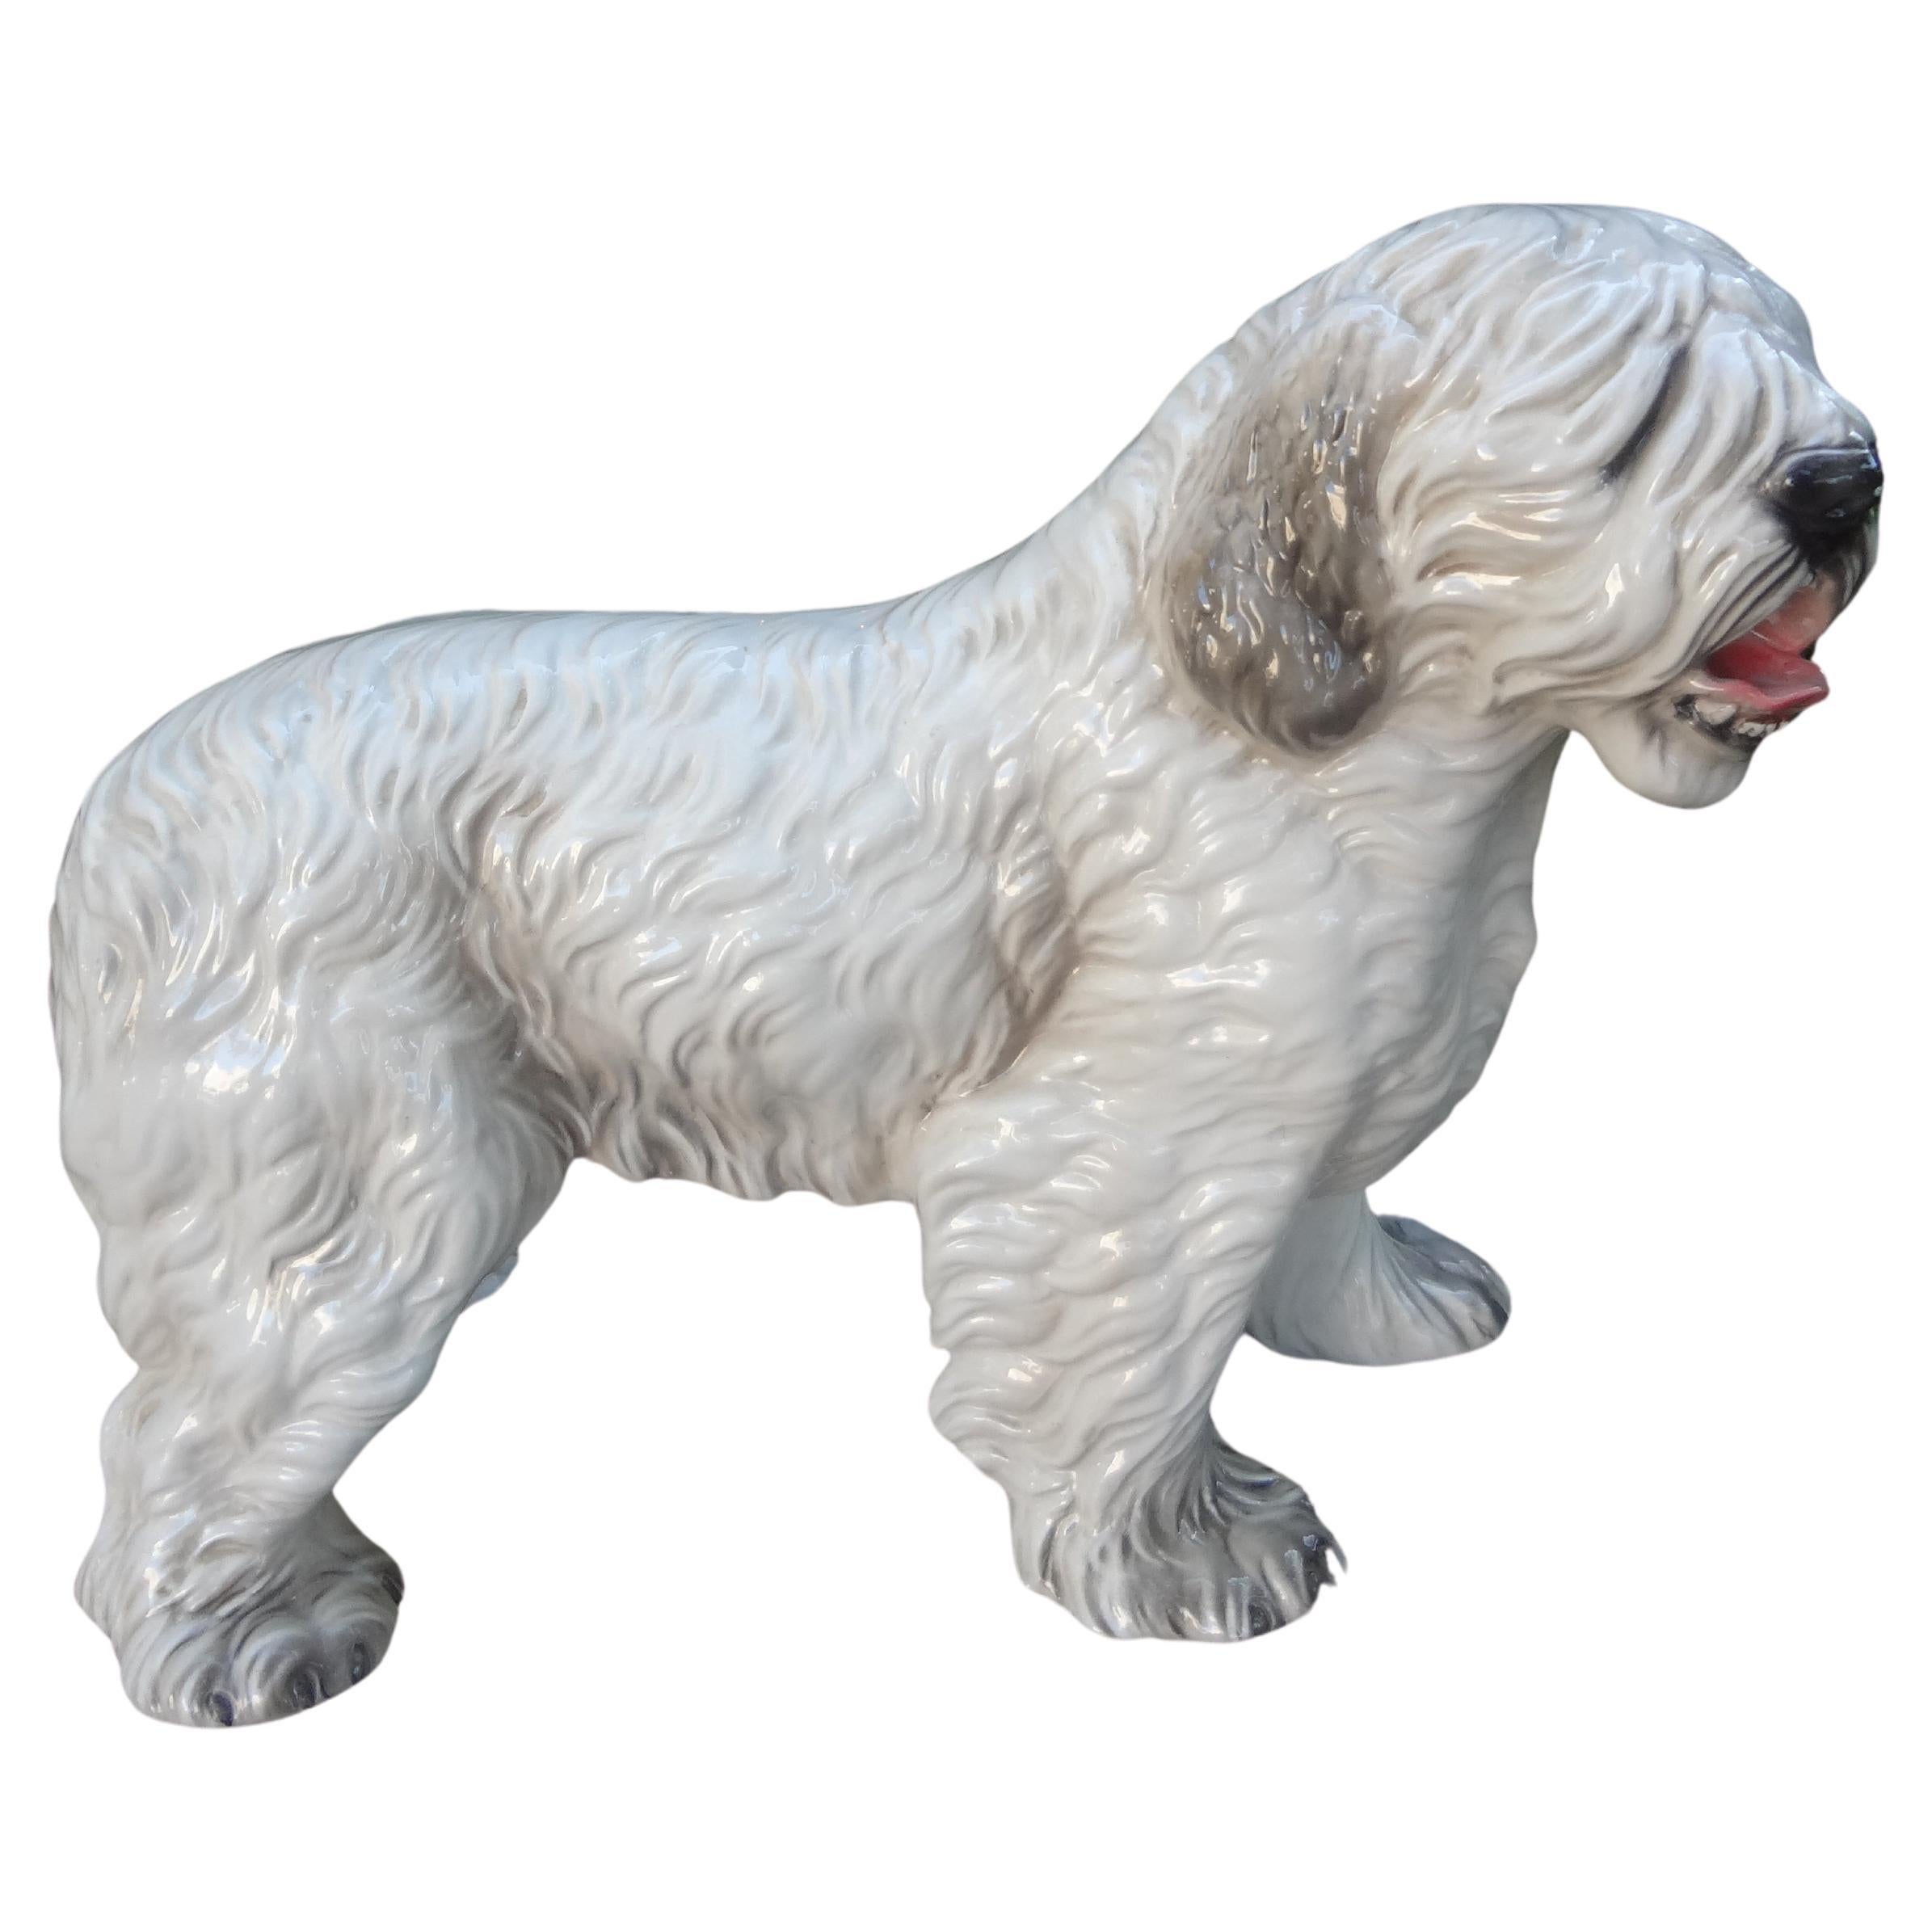 Italian Glazed Ceramic Dog Sculpture.
Well detailed Italian glazed ceramic dog statue or sculpture of a Sheep Dog.
Stamped Ronzan, Made In Italy.